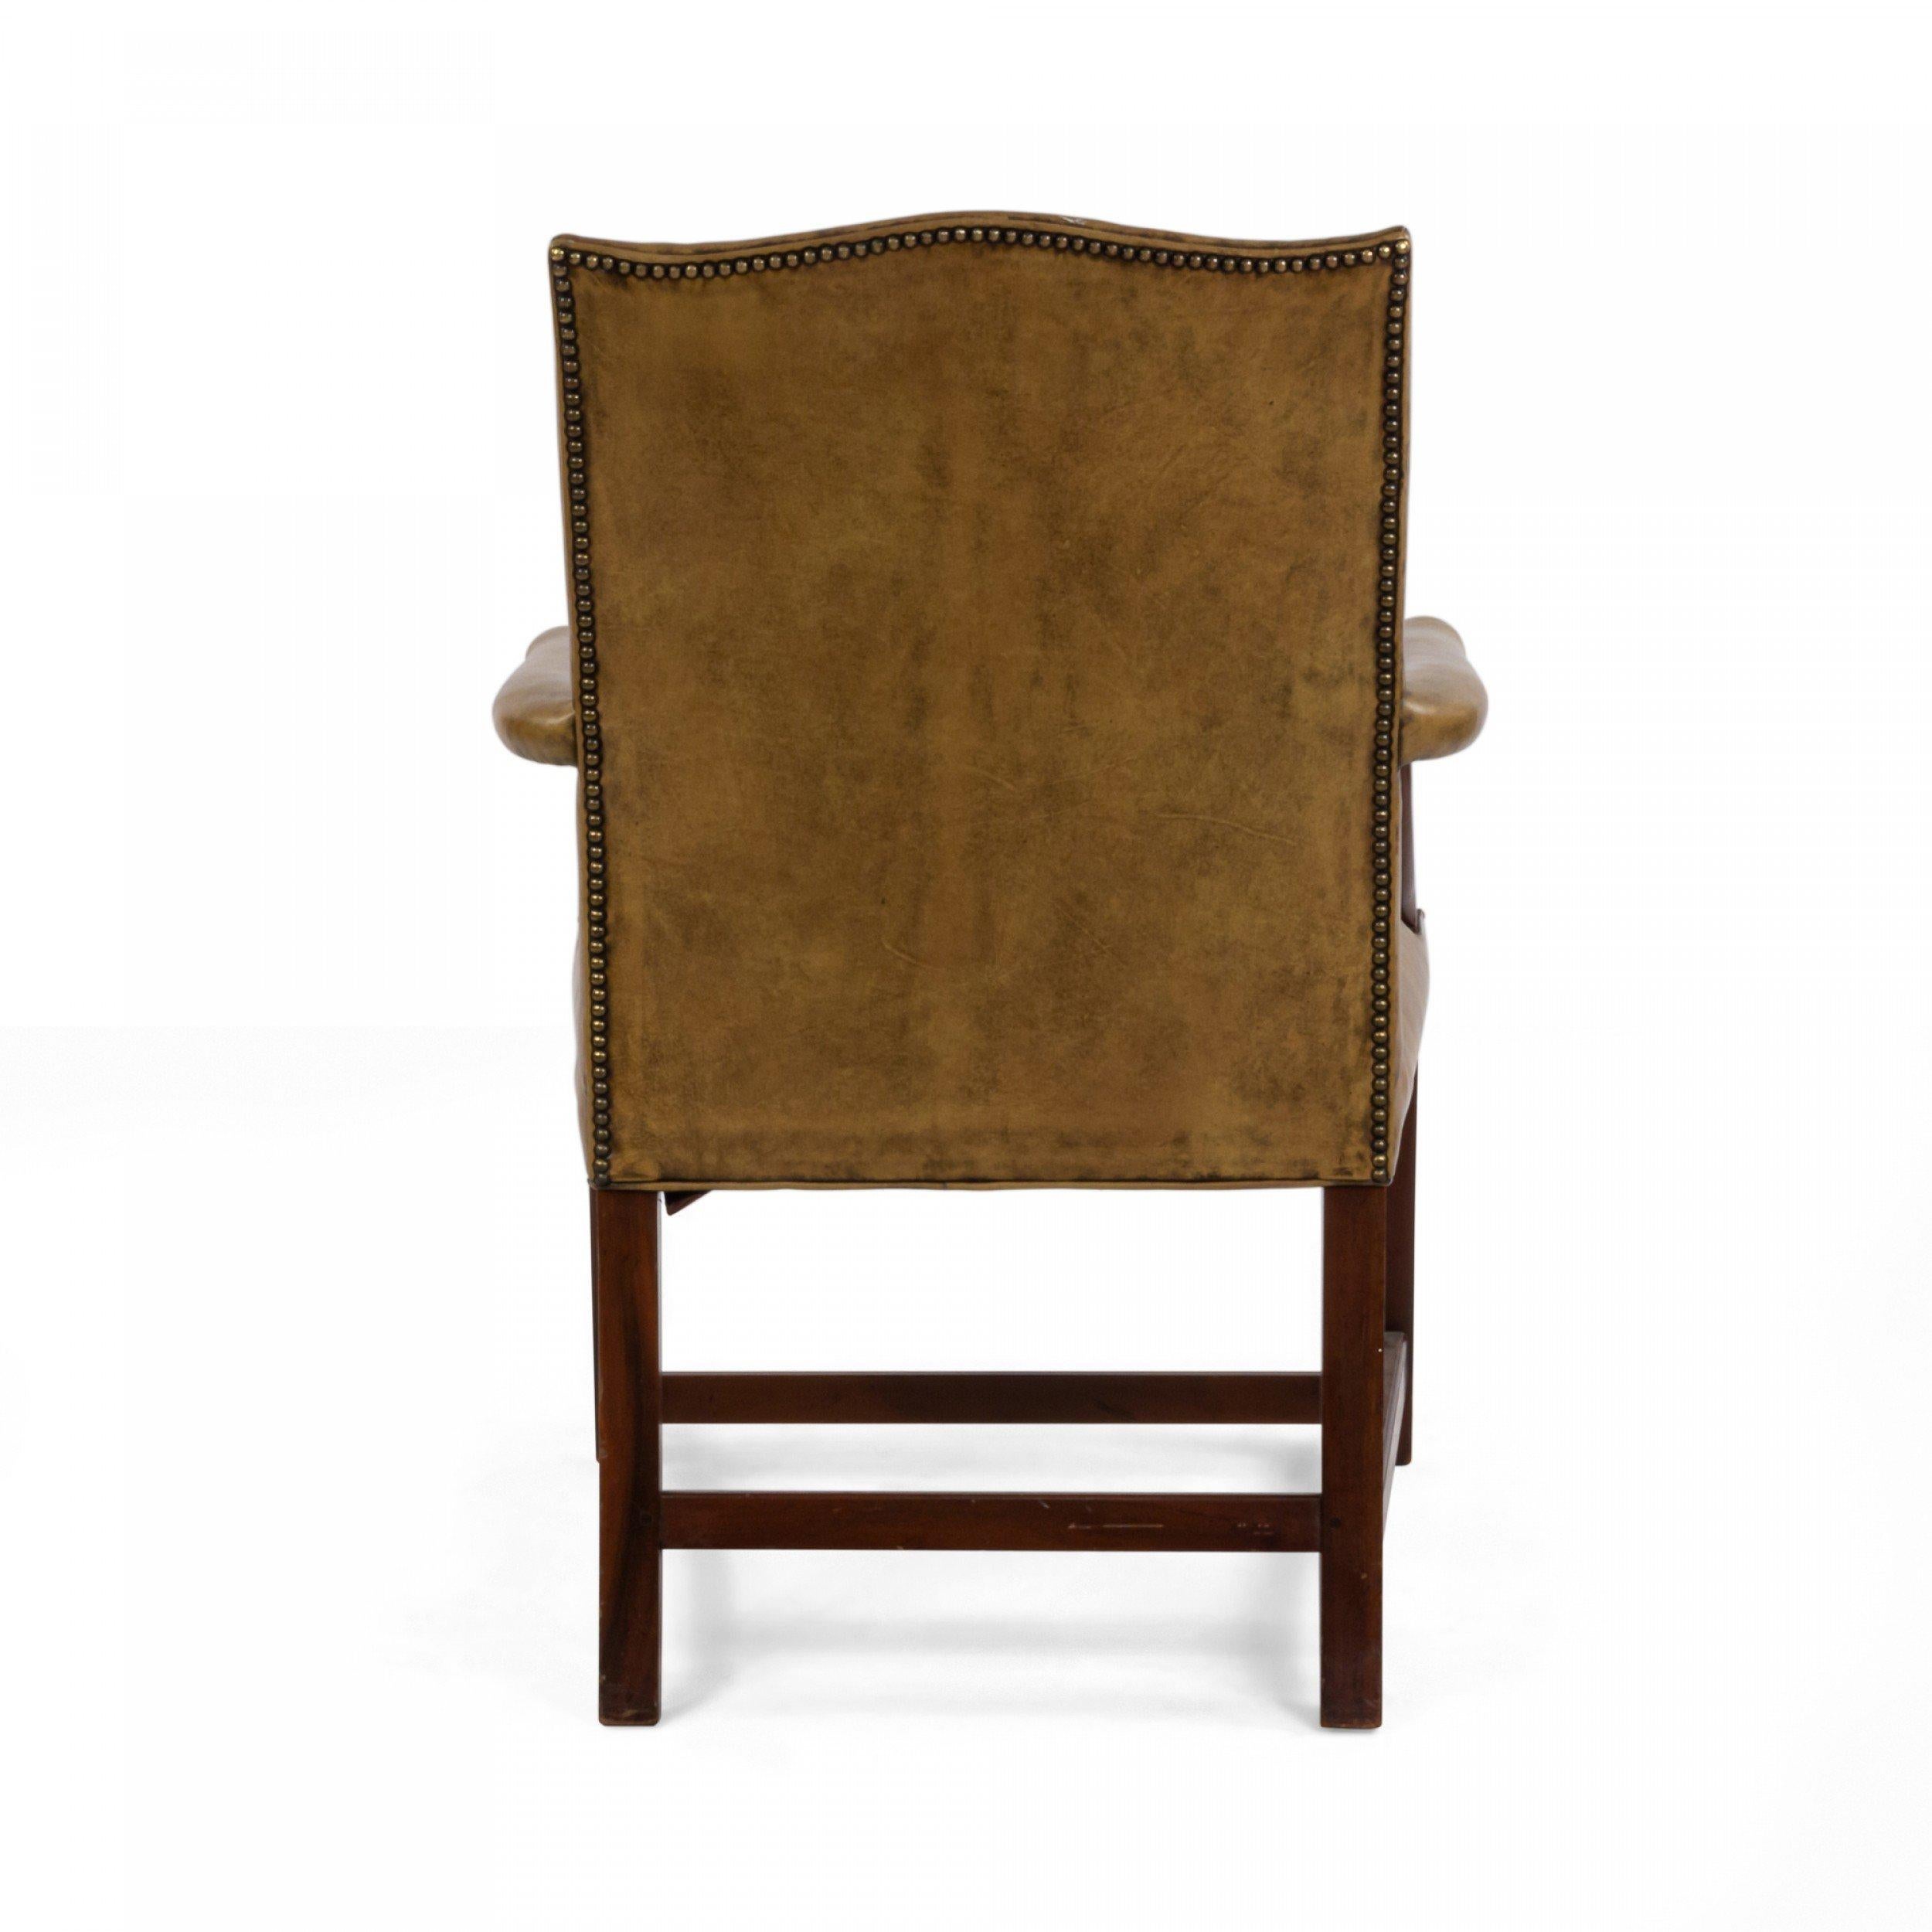 20th Century English Georgian Style Tan Leather Armchair with Brass Rivets For Sale